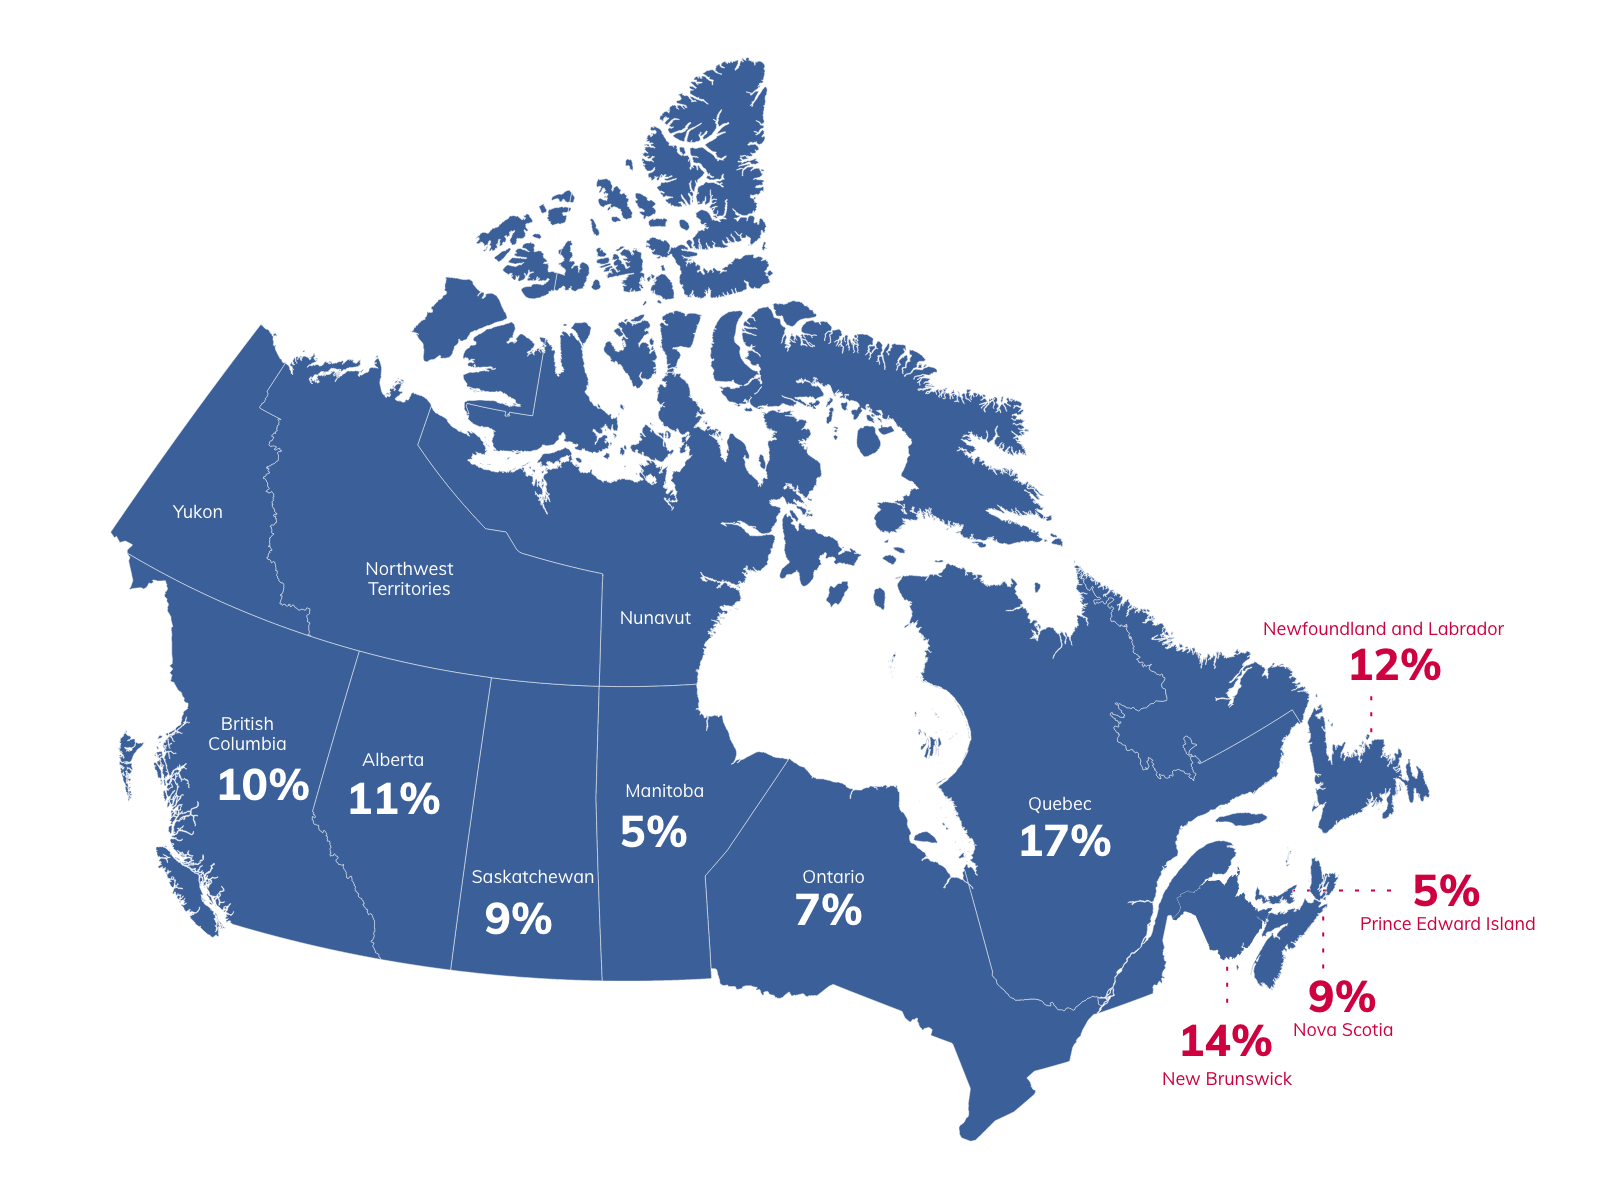 Map of Canada with Percentage of Respondents by provinces